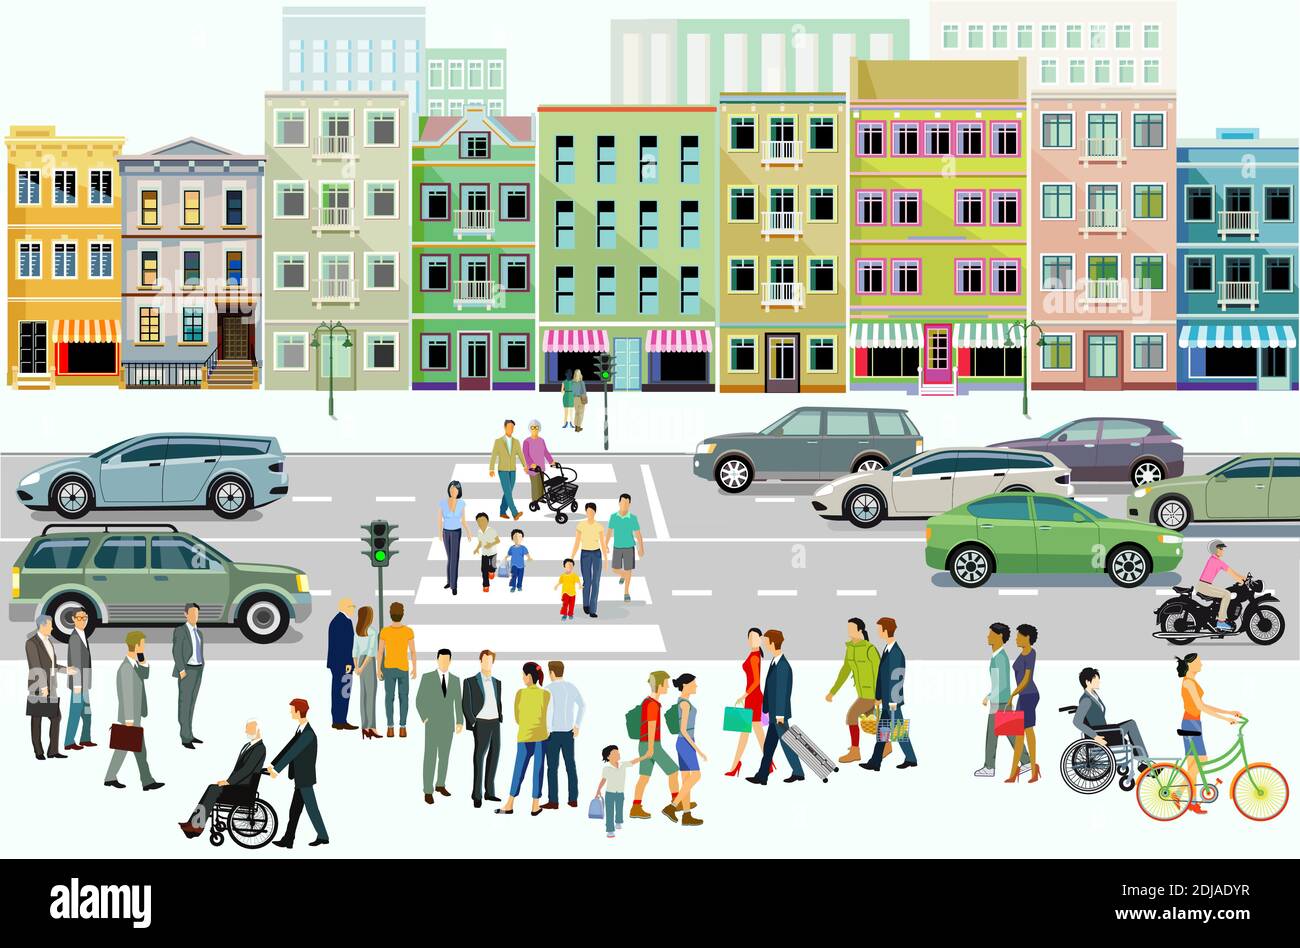 City with road traffic, apartment buildings and pedestrians on the sidewalk, illustration Stock Vector